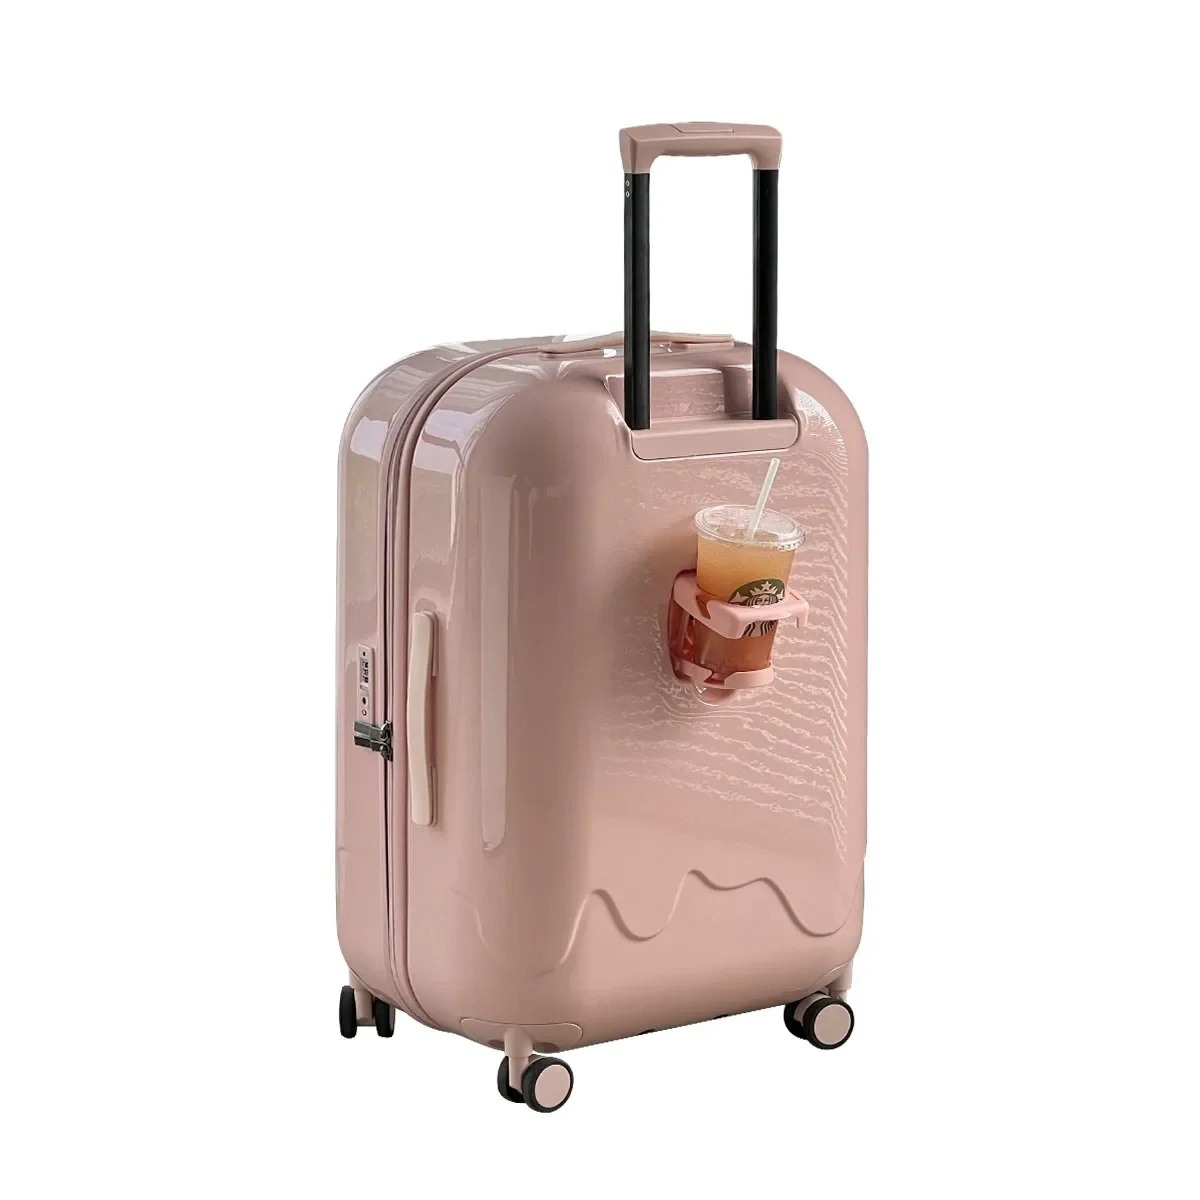 

Ice Cream Bubble Luggage Women's Lightweight Mute Universal Wheel Trolley Case Solid Suitcase 20-Inch Boarding Password Suitcase